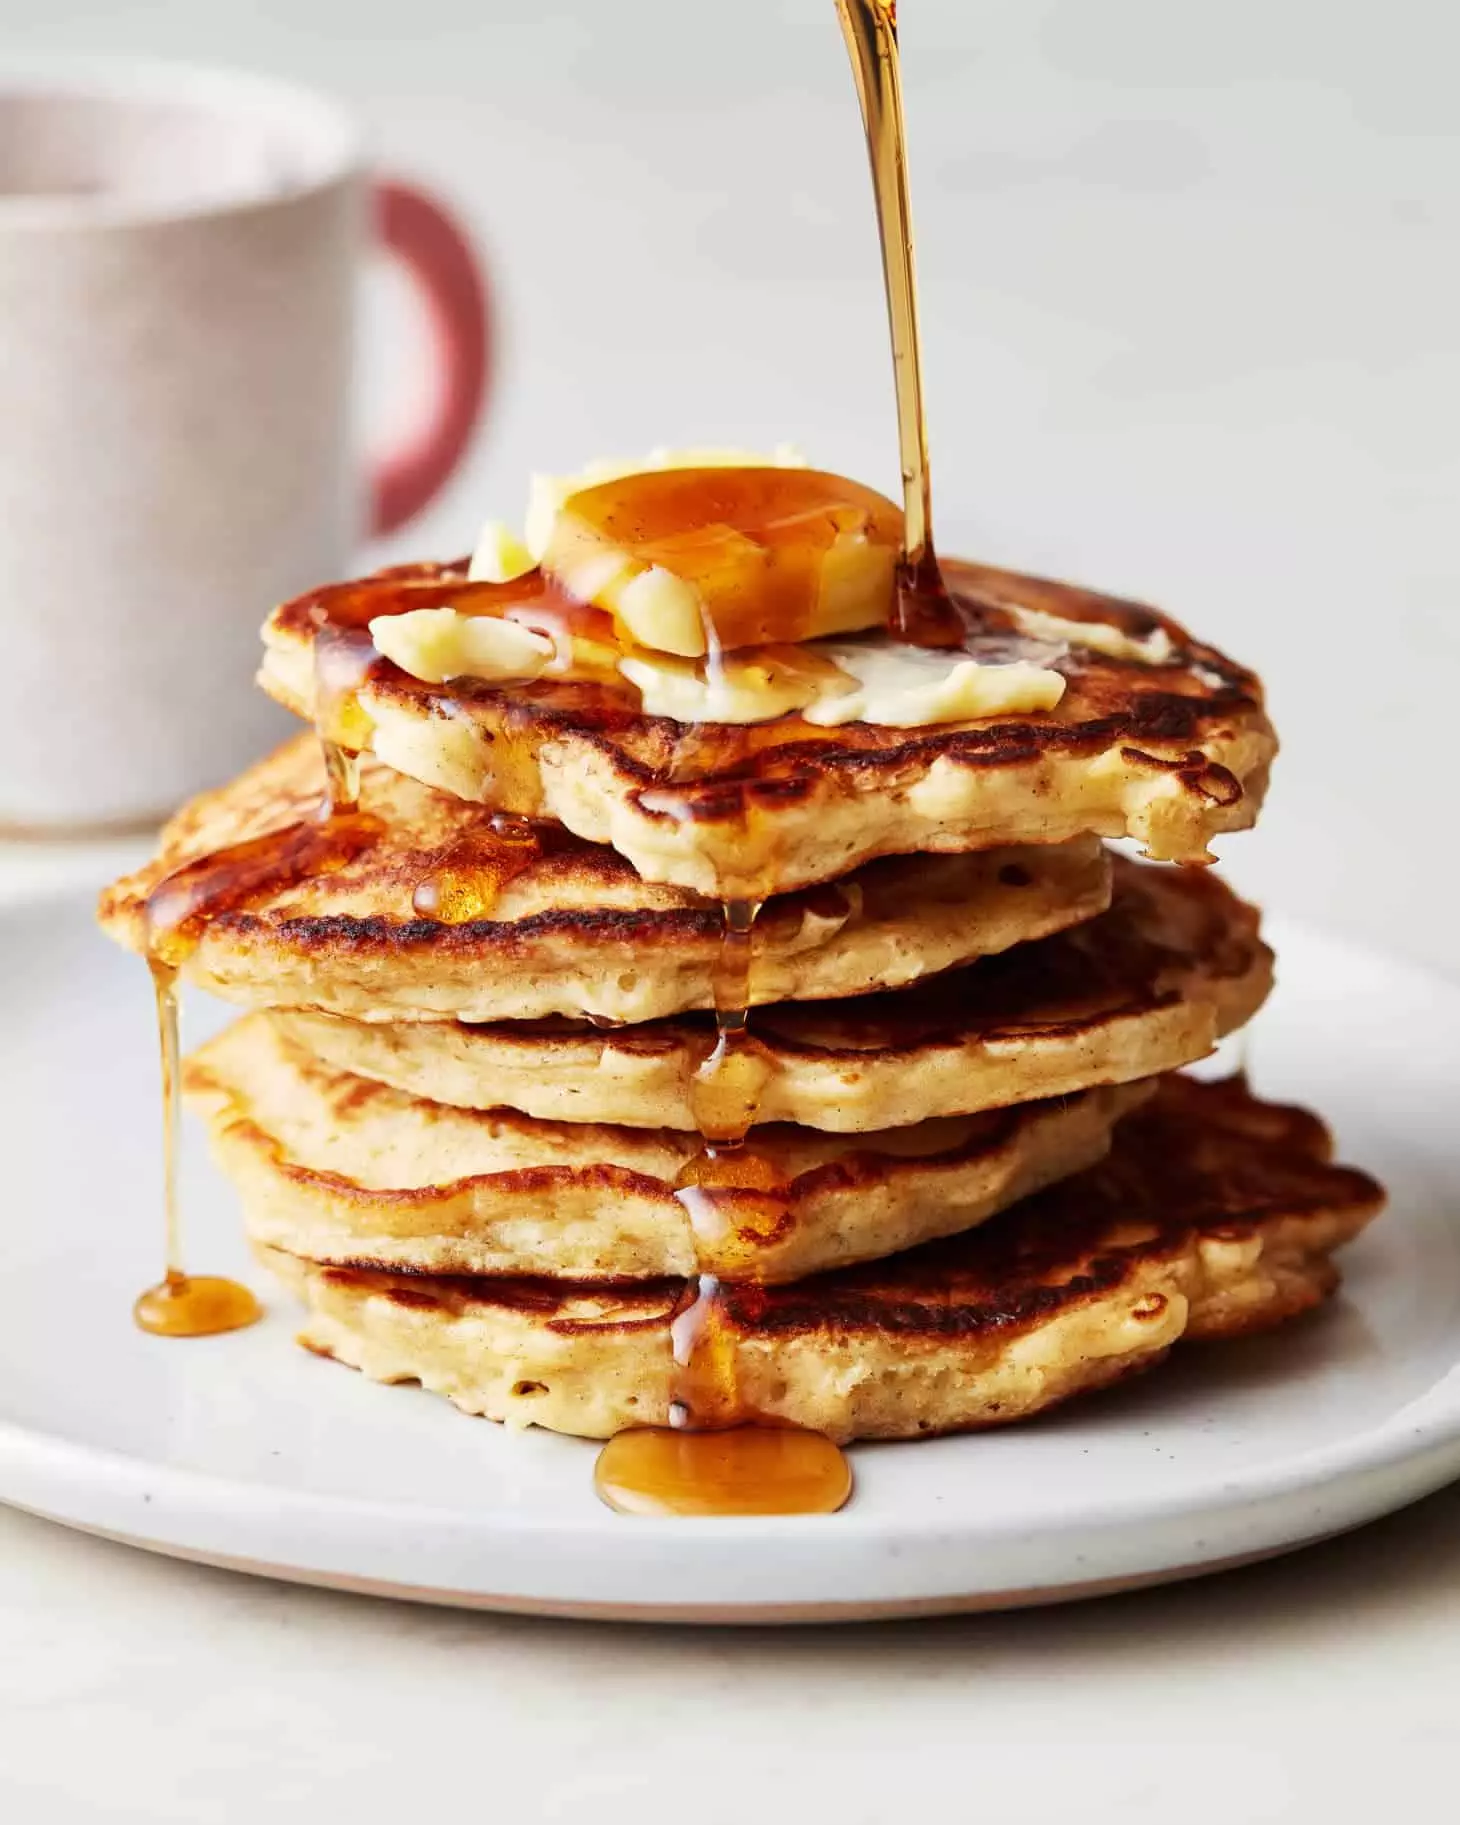 easy oatmeal pancakes are just one example in this list of family favorite pantry recipes